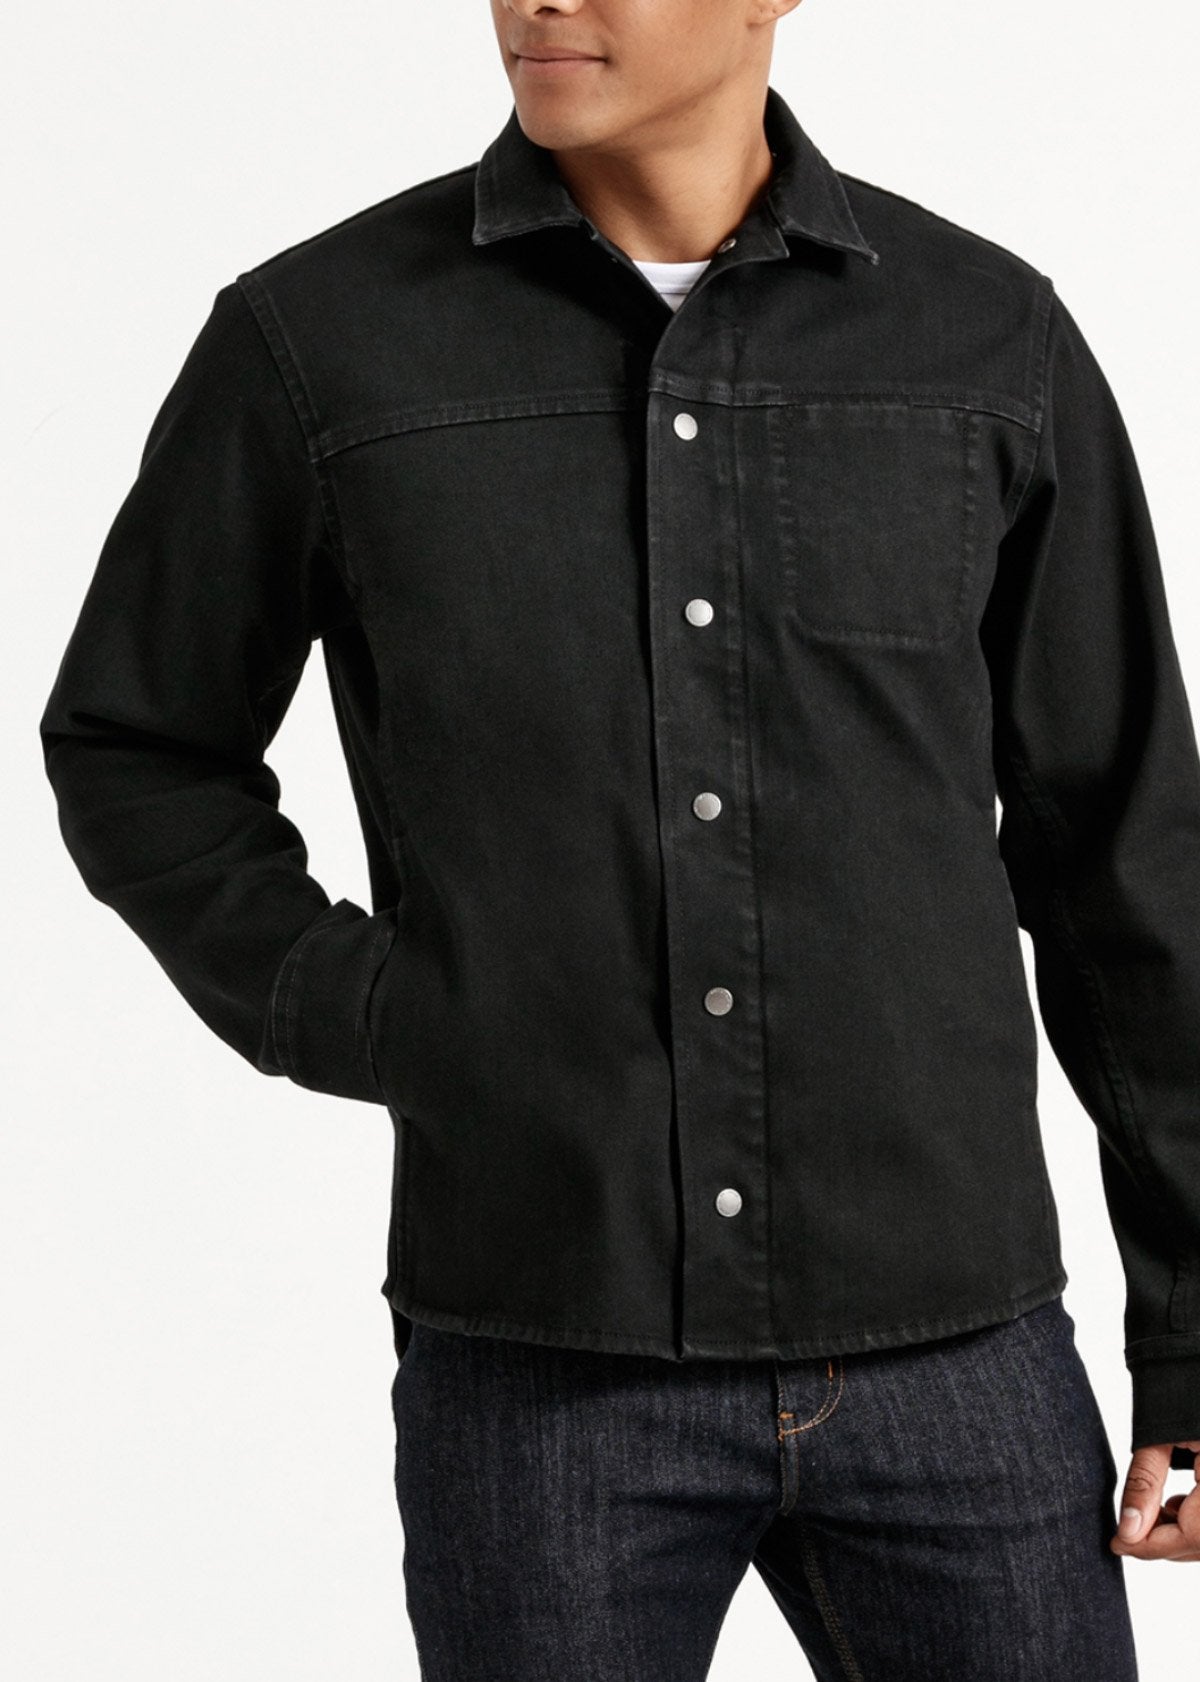 Waterproof black 3-in-1 stretch denim jacket close up buttoned up